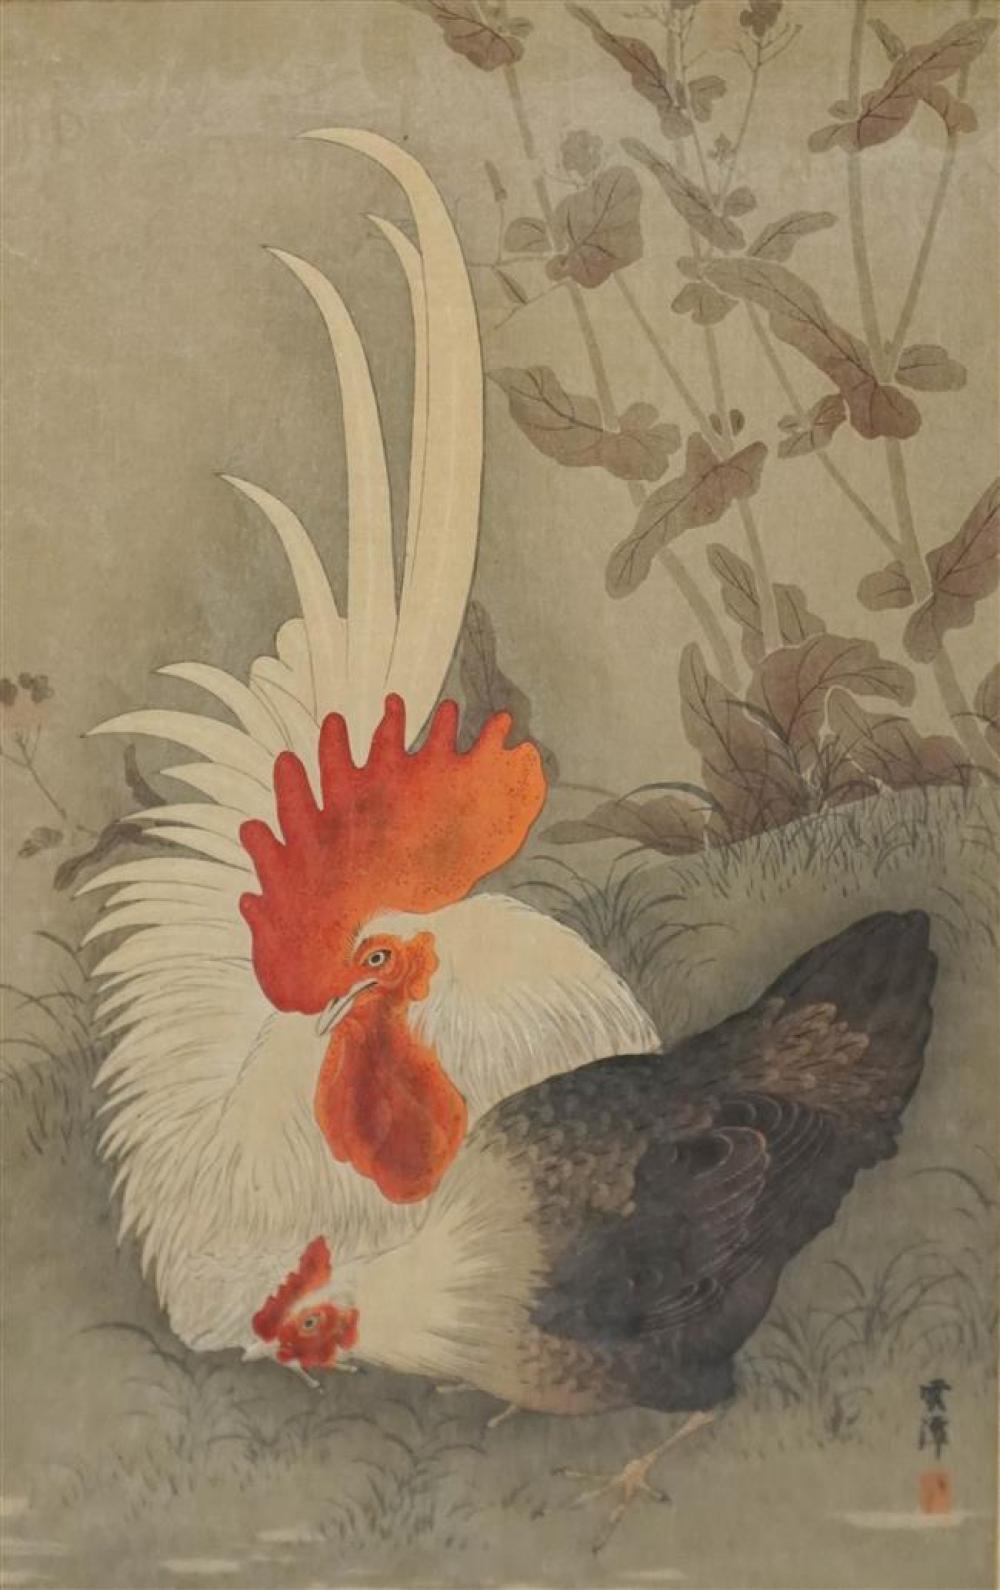 UNKYO JAPANESE 20TH CENTURY ROOSTER 3252a7